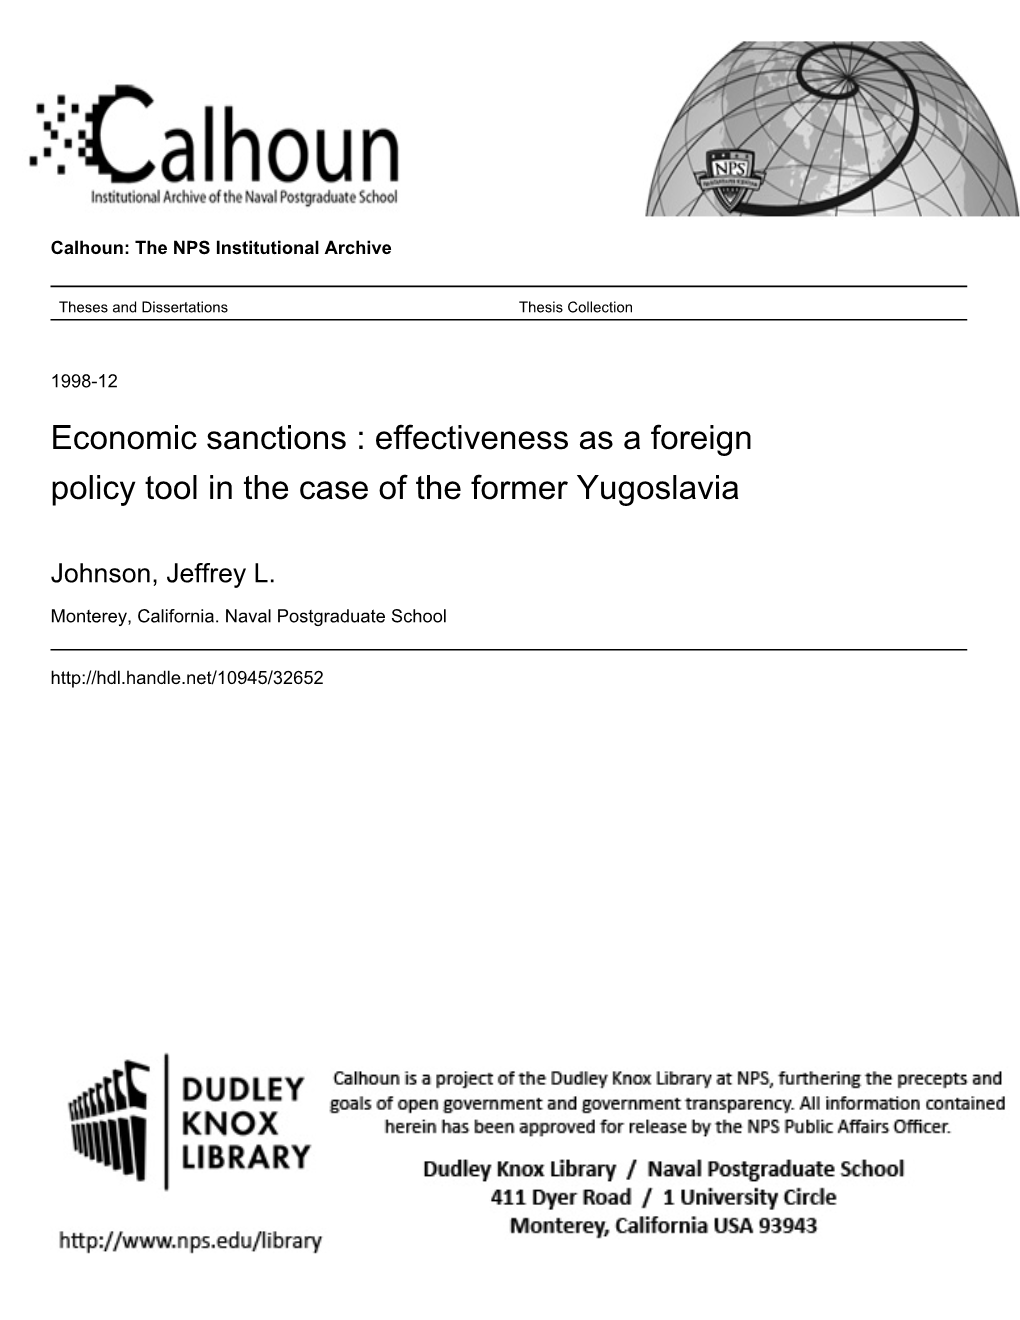 Economic Sanctions : Effectiveness As a Foreign Policy Tool in the Case of the Former Yugoslavia